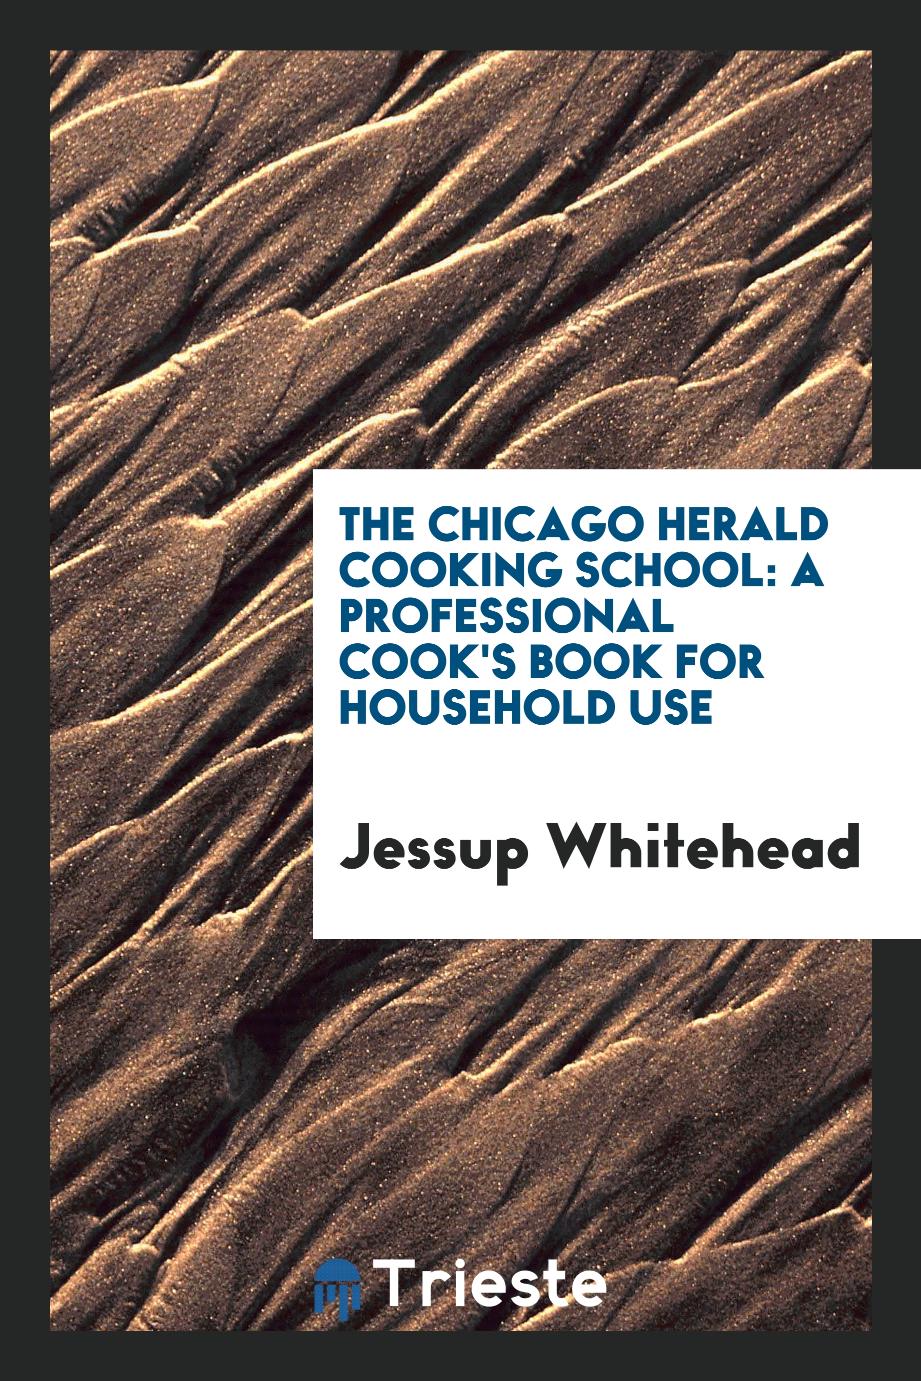 The Chicago Herald Cooking School: A Professional Cook's Book for Household Use